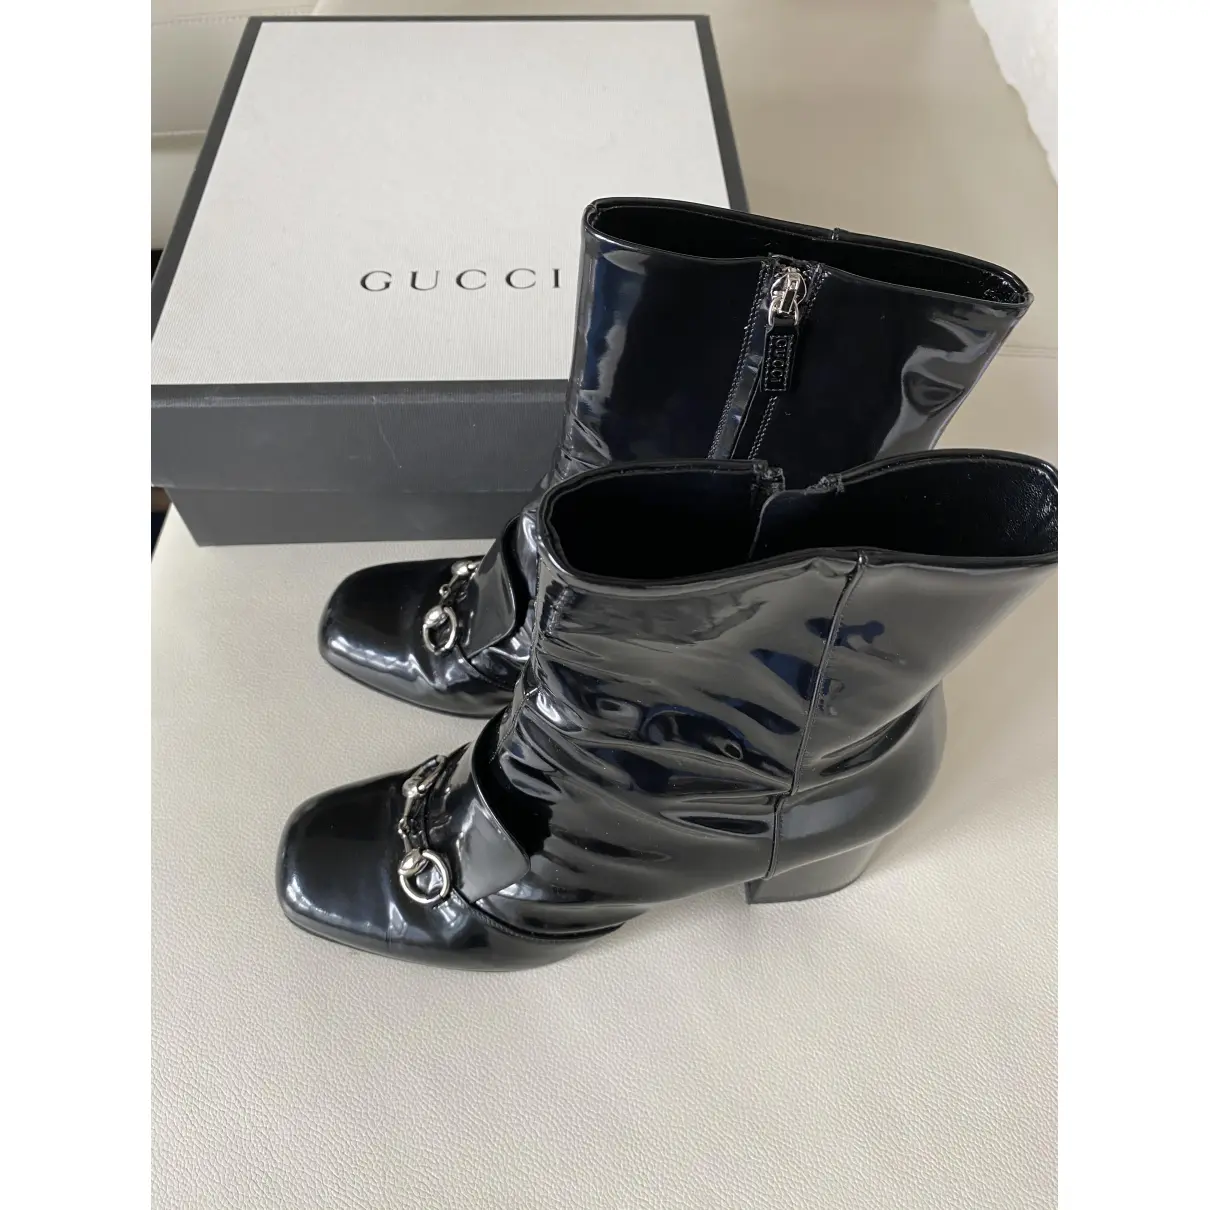 Buy Gucci Patent leather boots online